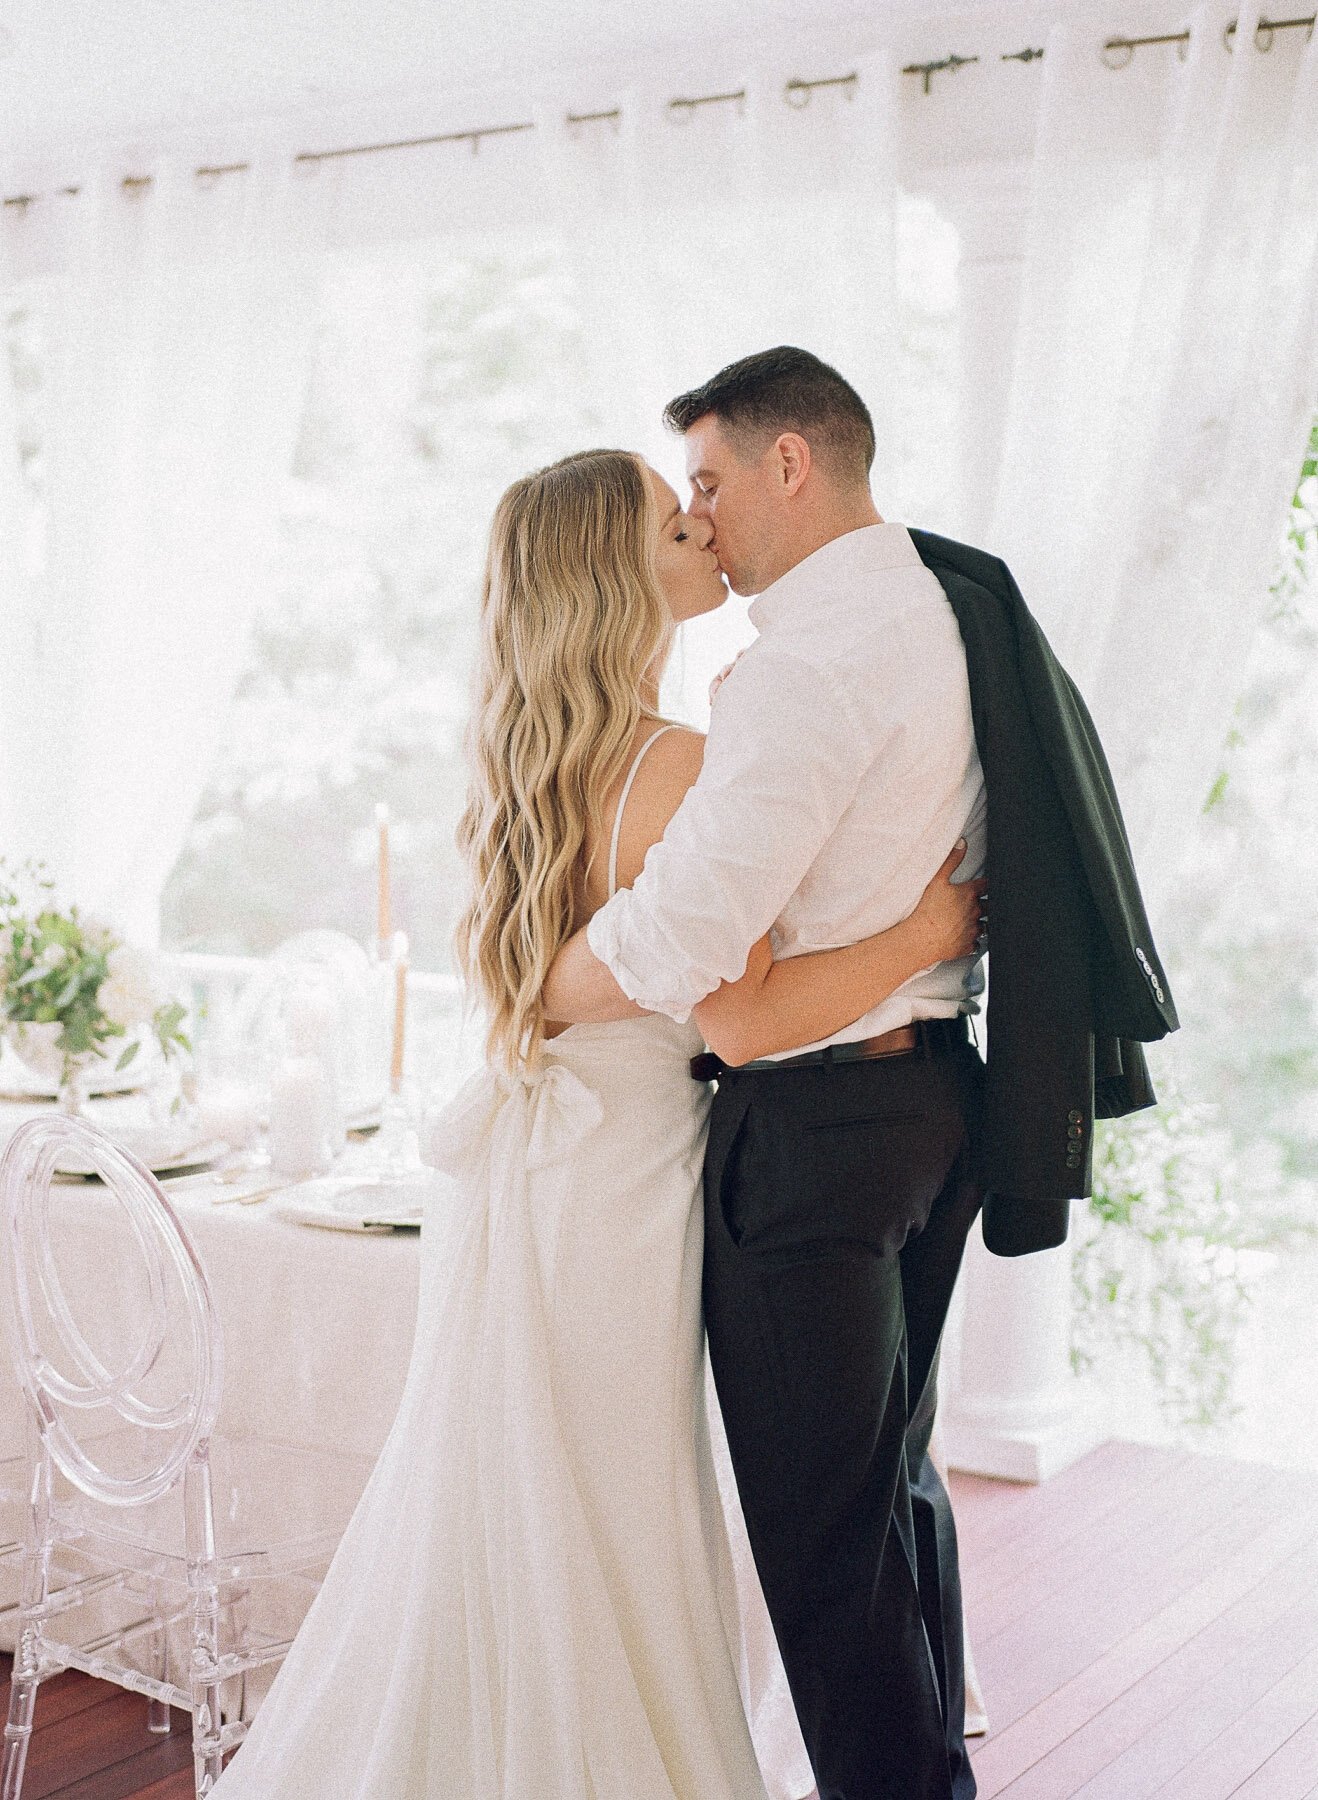 Kelly Strong Intimate Wedding in Upstate NY by Michelle Lange Photography - 66.JPG